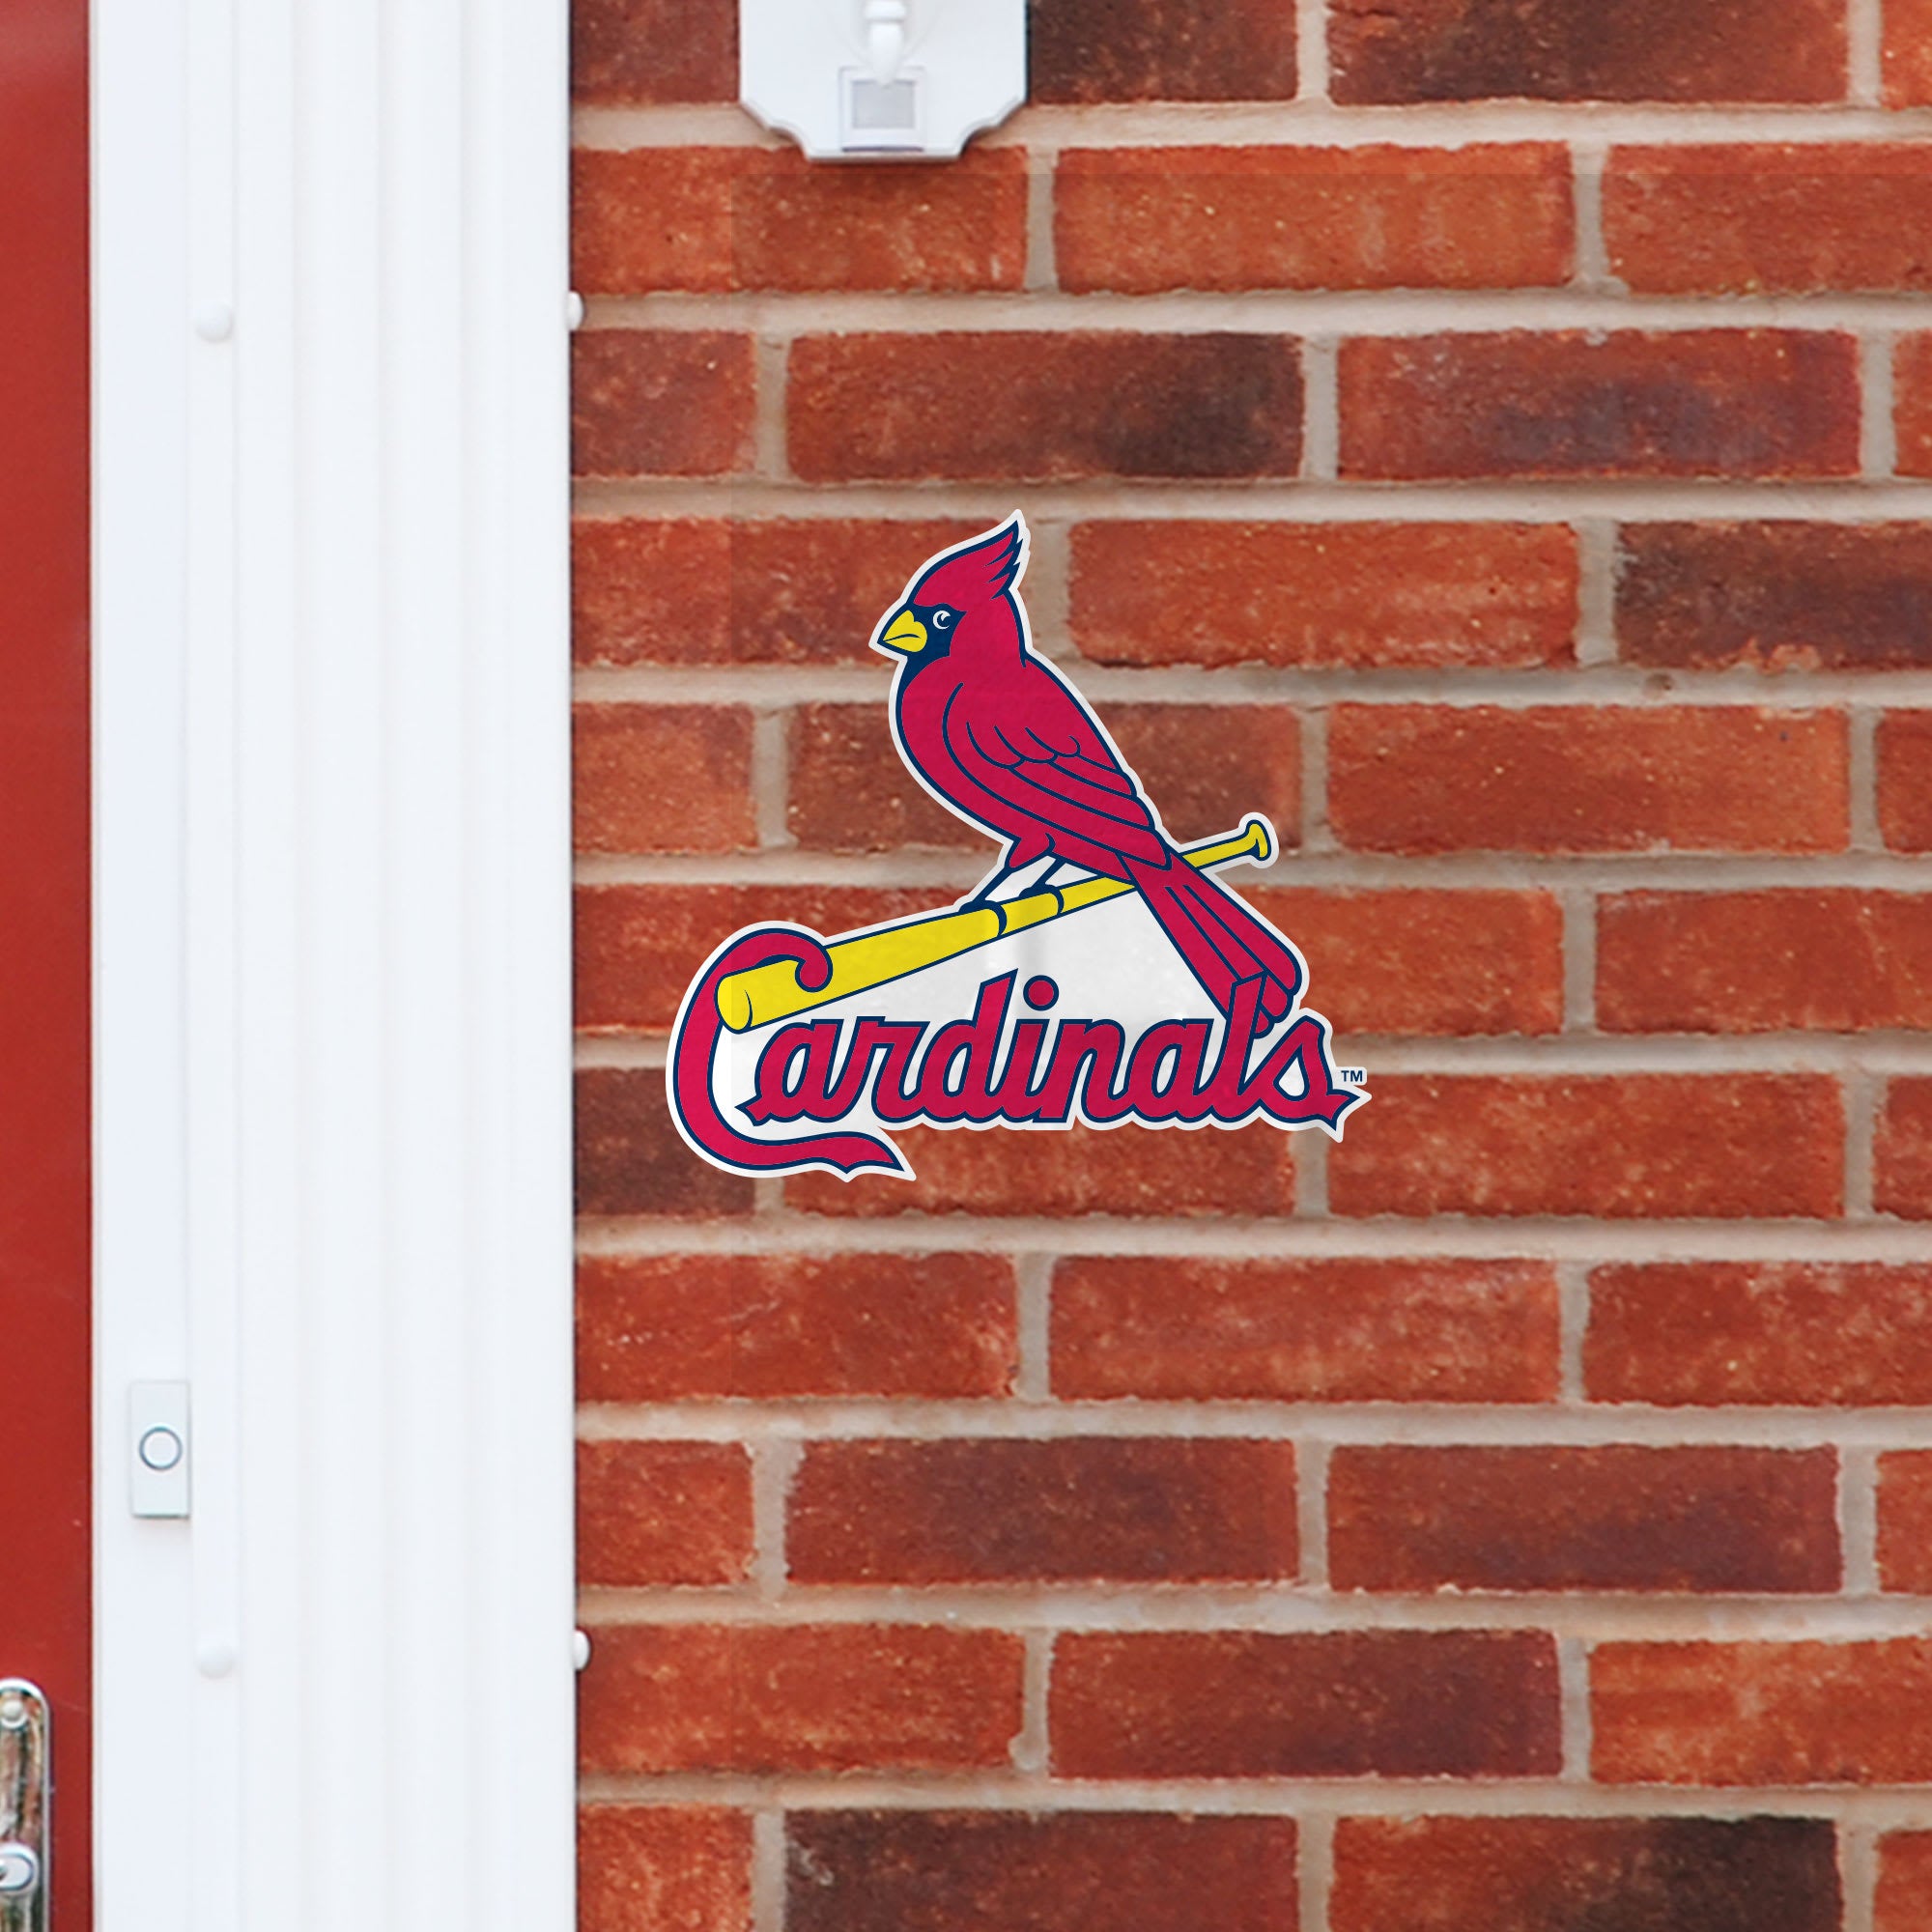 St. Louis Cardinals: Logo - Officially Licensed MLB Outdoor Graphic Large by Fathead | Wood/Aluminum